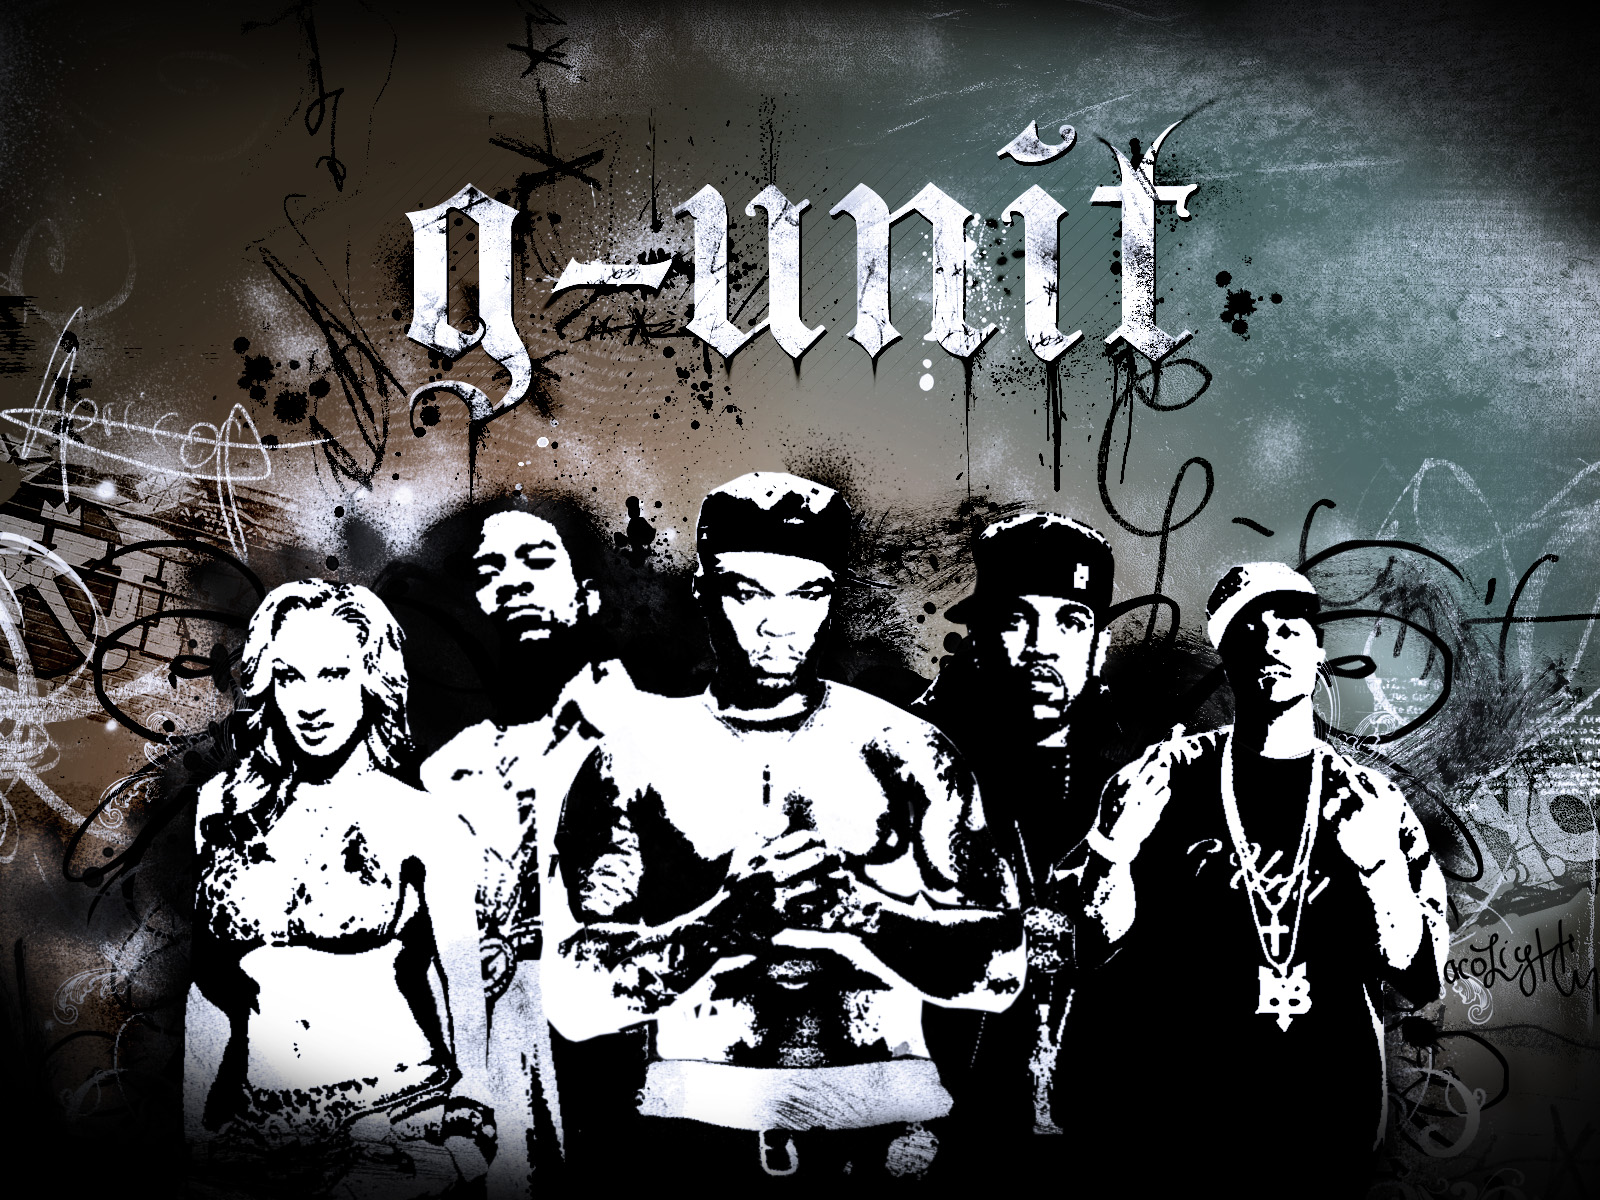 G unit by acolight on